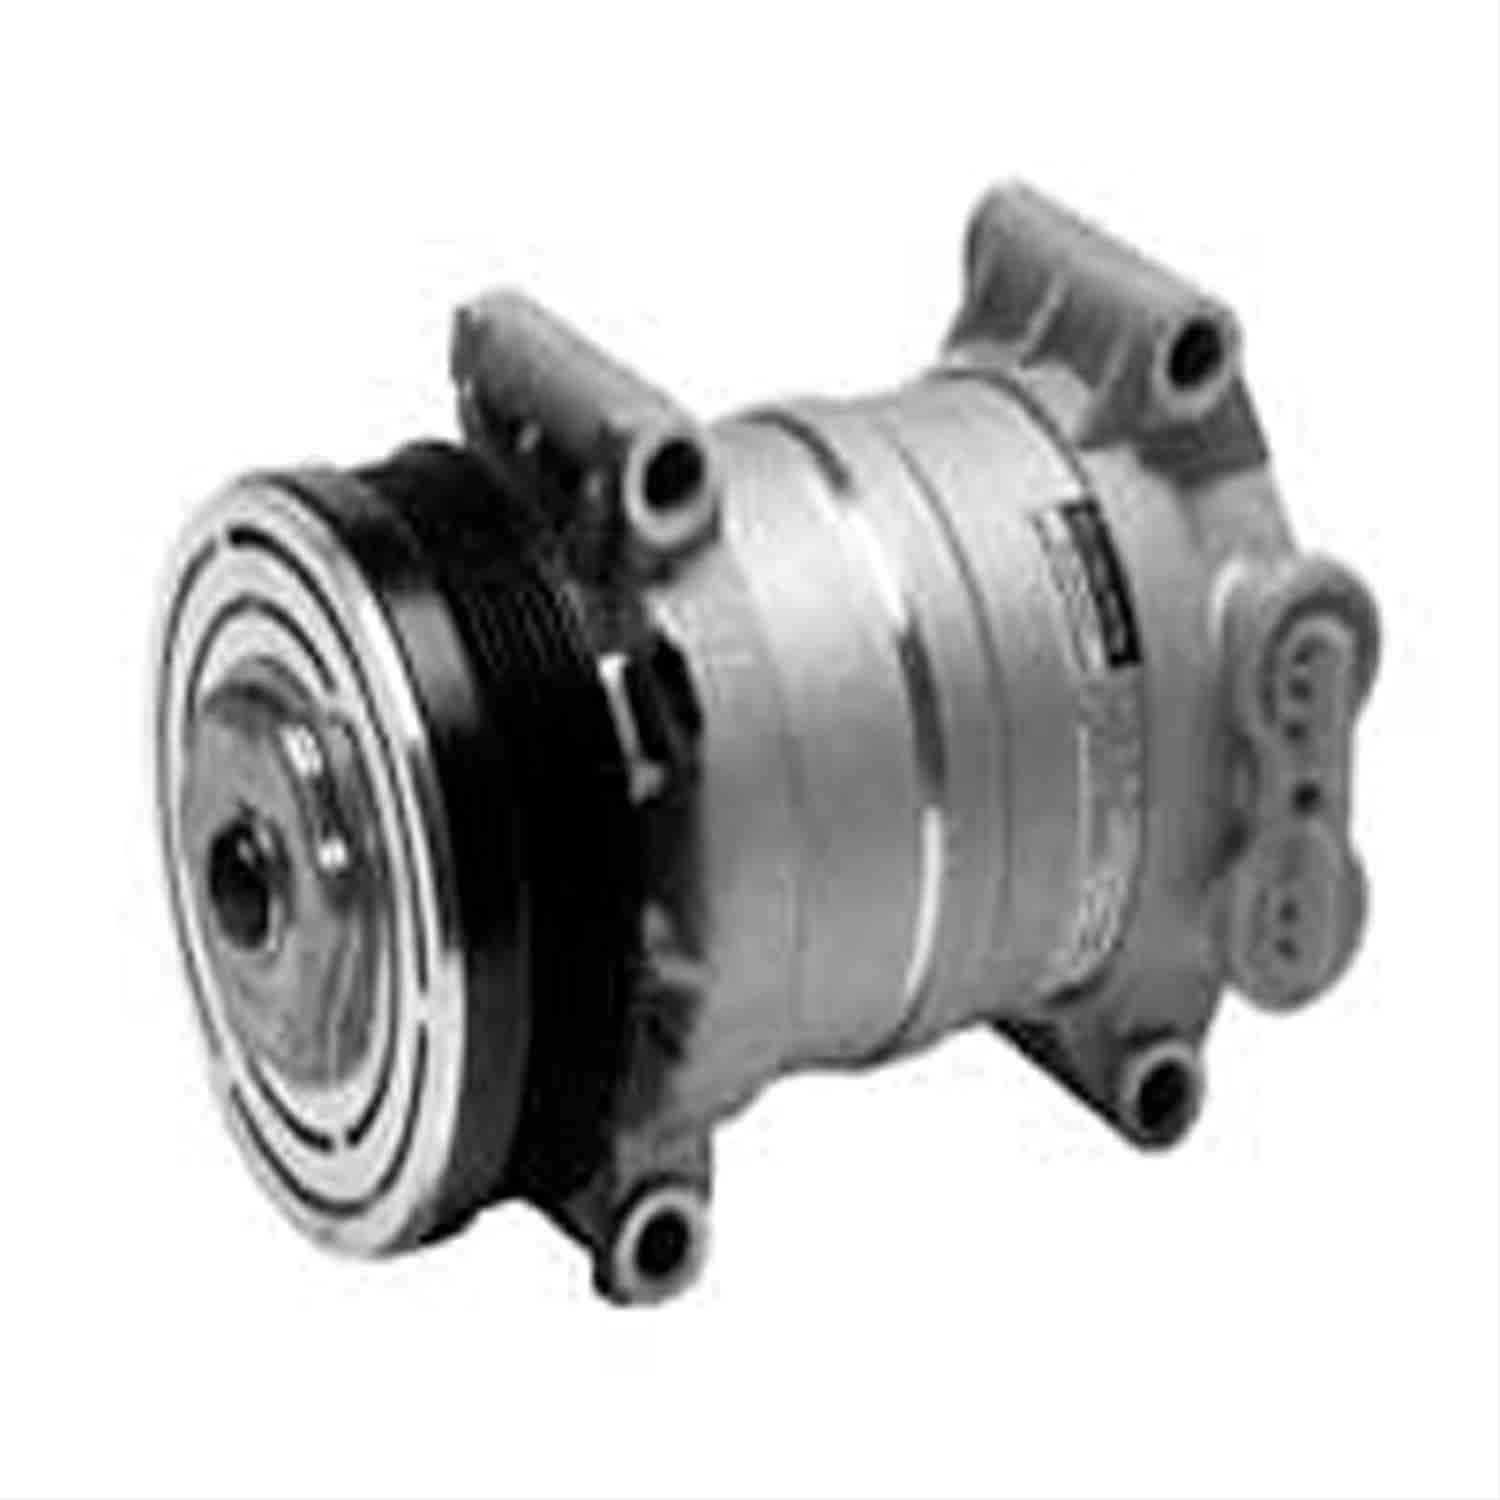 A/C Compressor and Clutch 1996-2002 Chevrolet, Cadillac, GMC, Oldsmobile